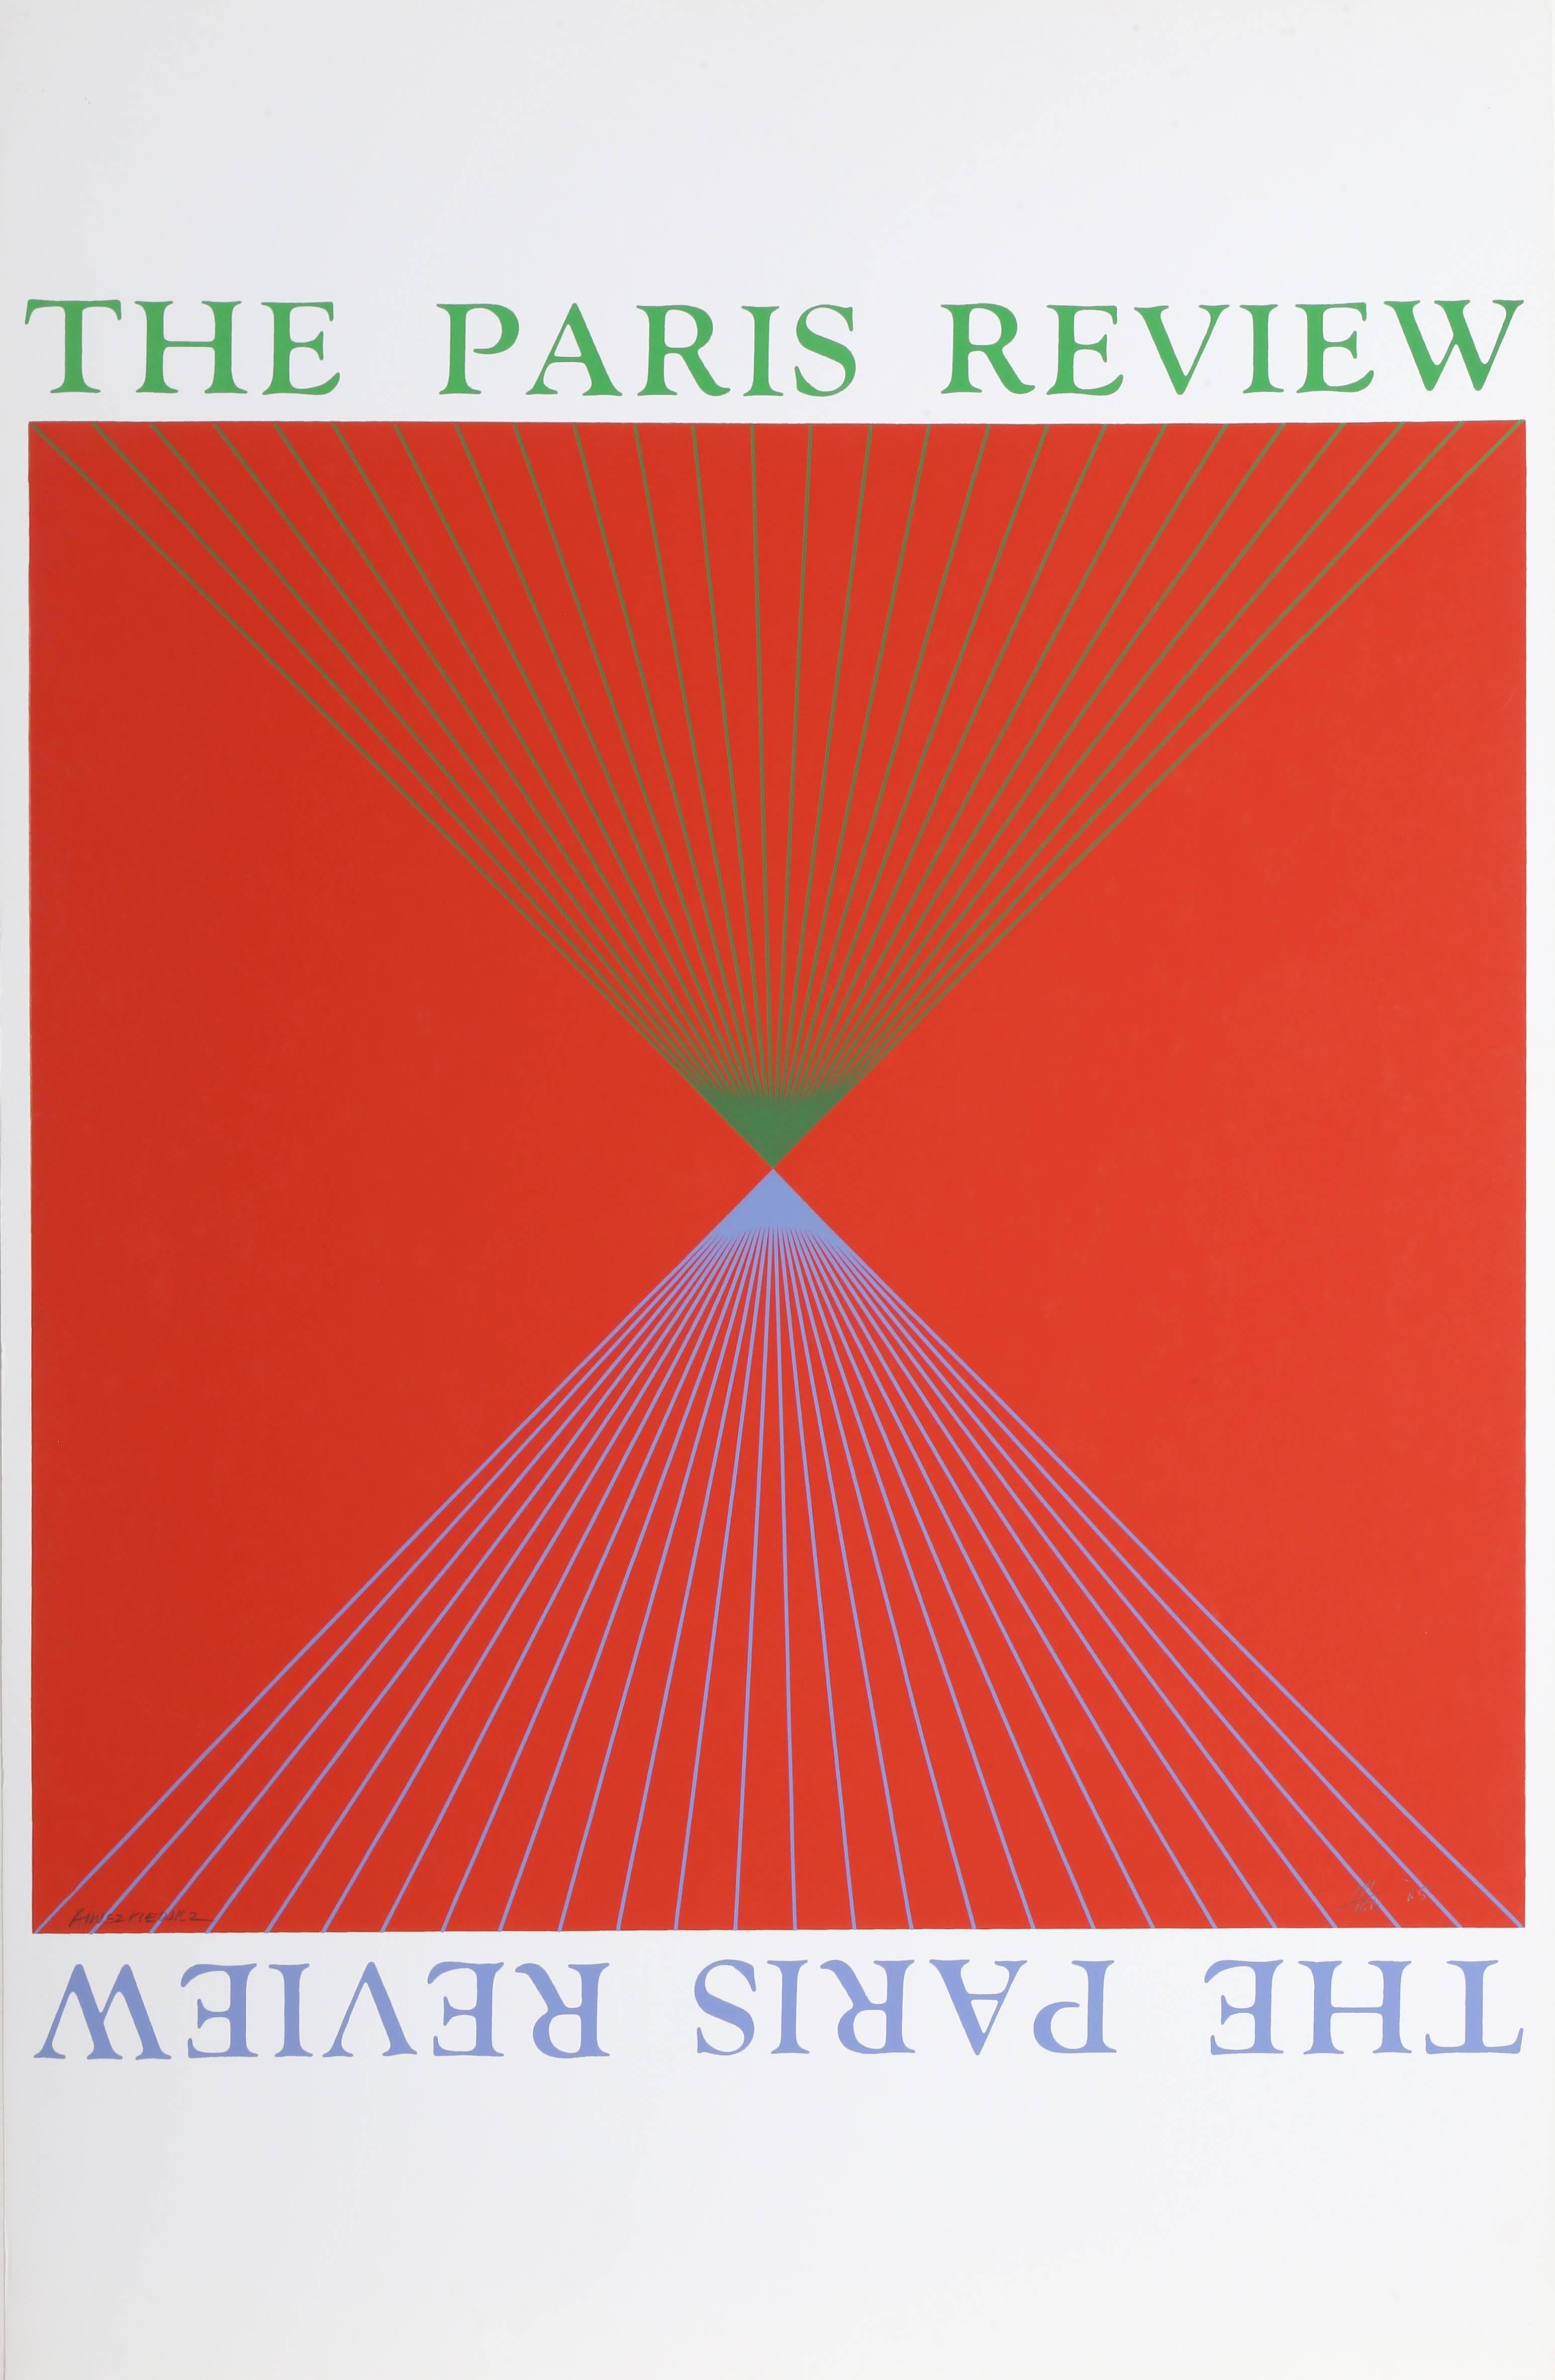 Considered a major force in the Op Art movement, Anuszkiewicz is concerned with the optical changes that occur when different high-intensity colors are applied to the same geometric configurations. Most of his work comprises visual investigations of